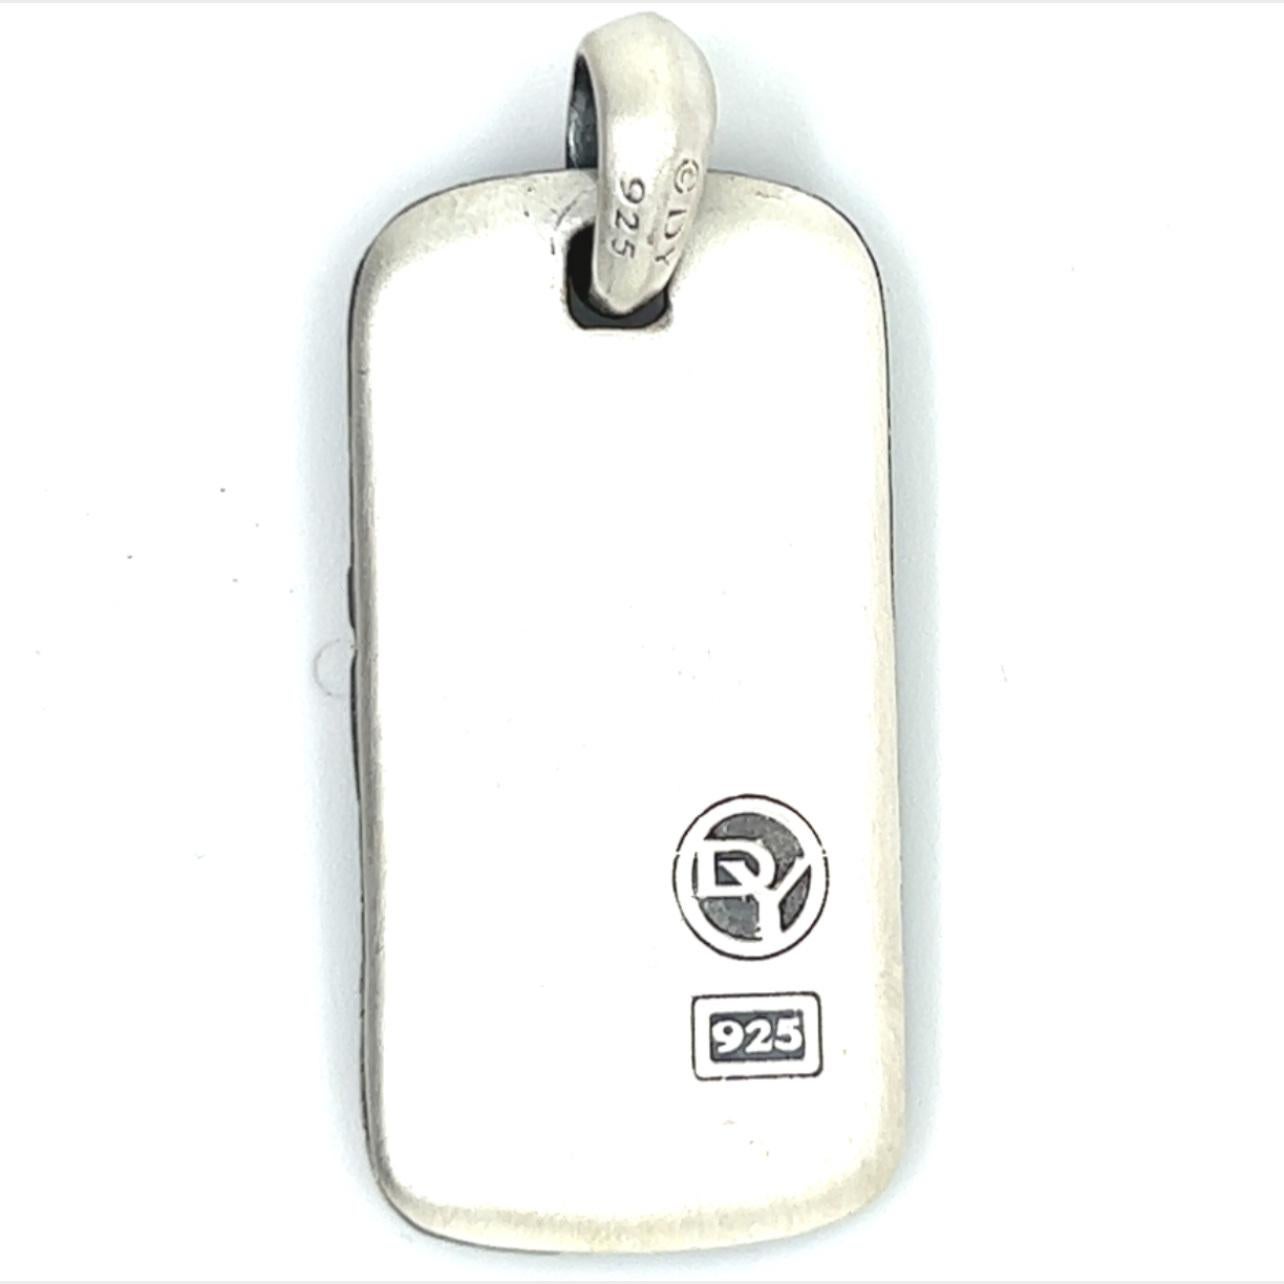 David Yurman Estate Griffen Dog Tag Sterling Silver In Good Condition For Sale In Brooklyn, NY